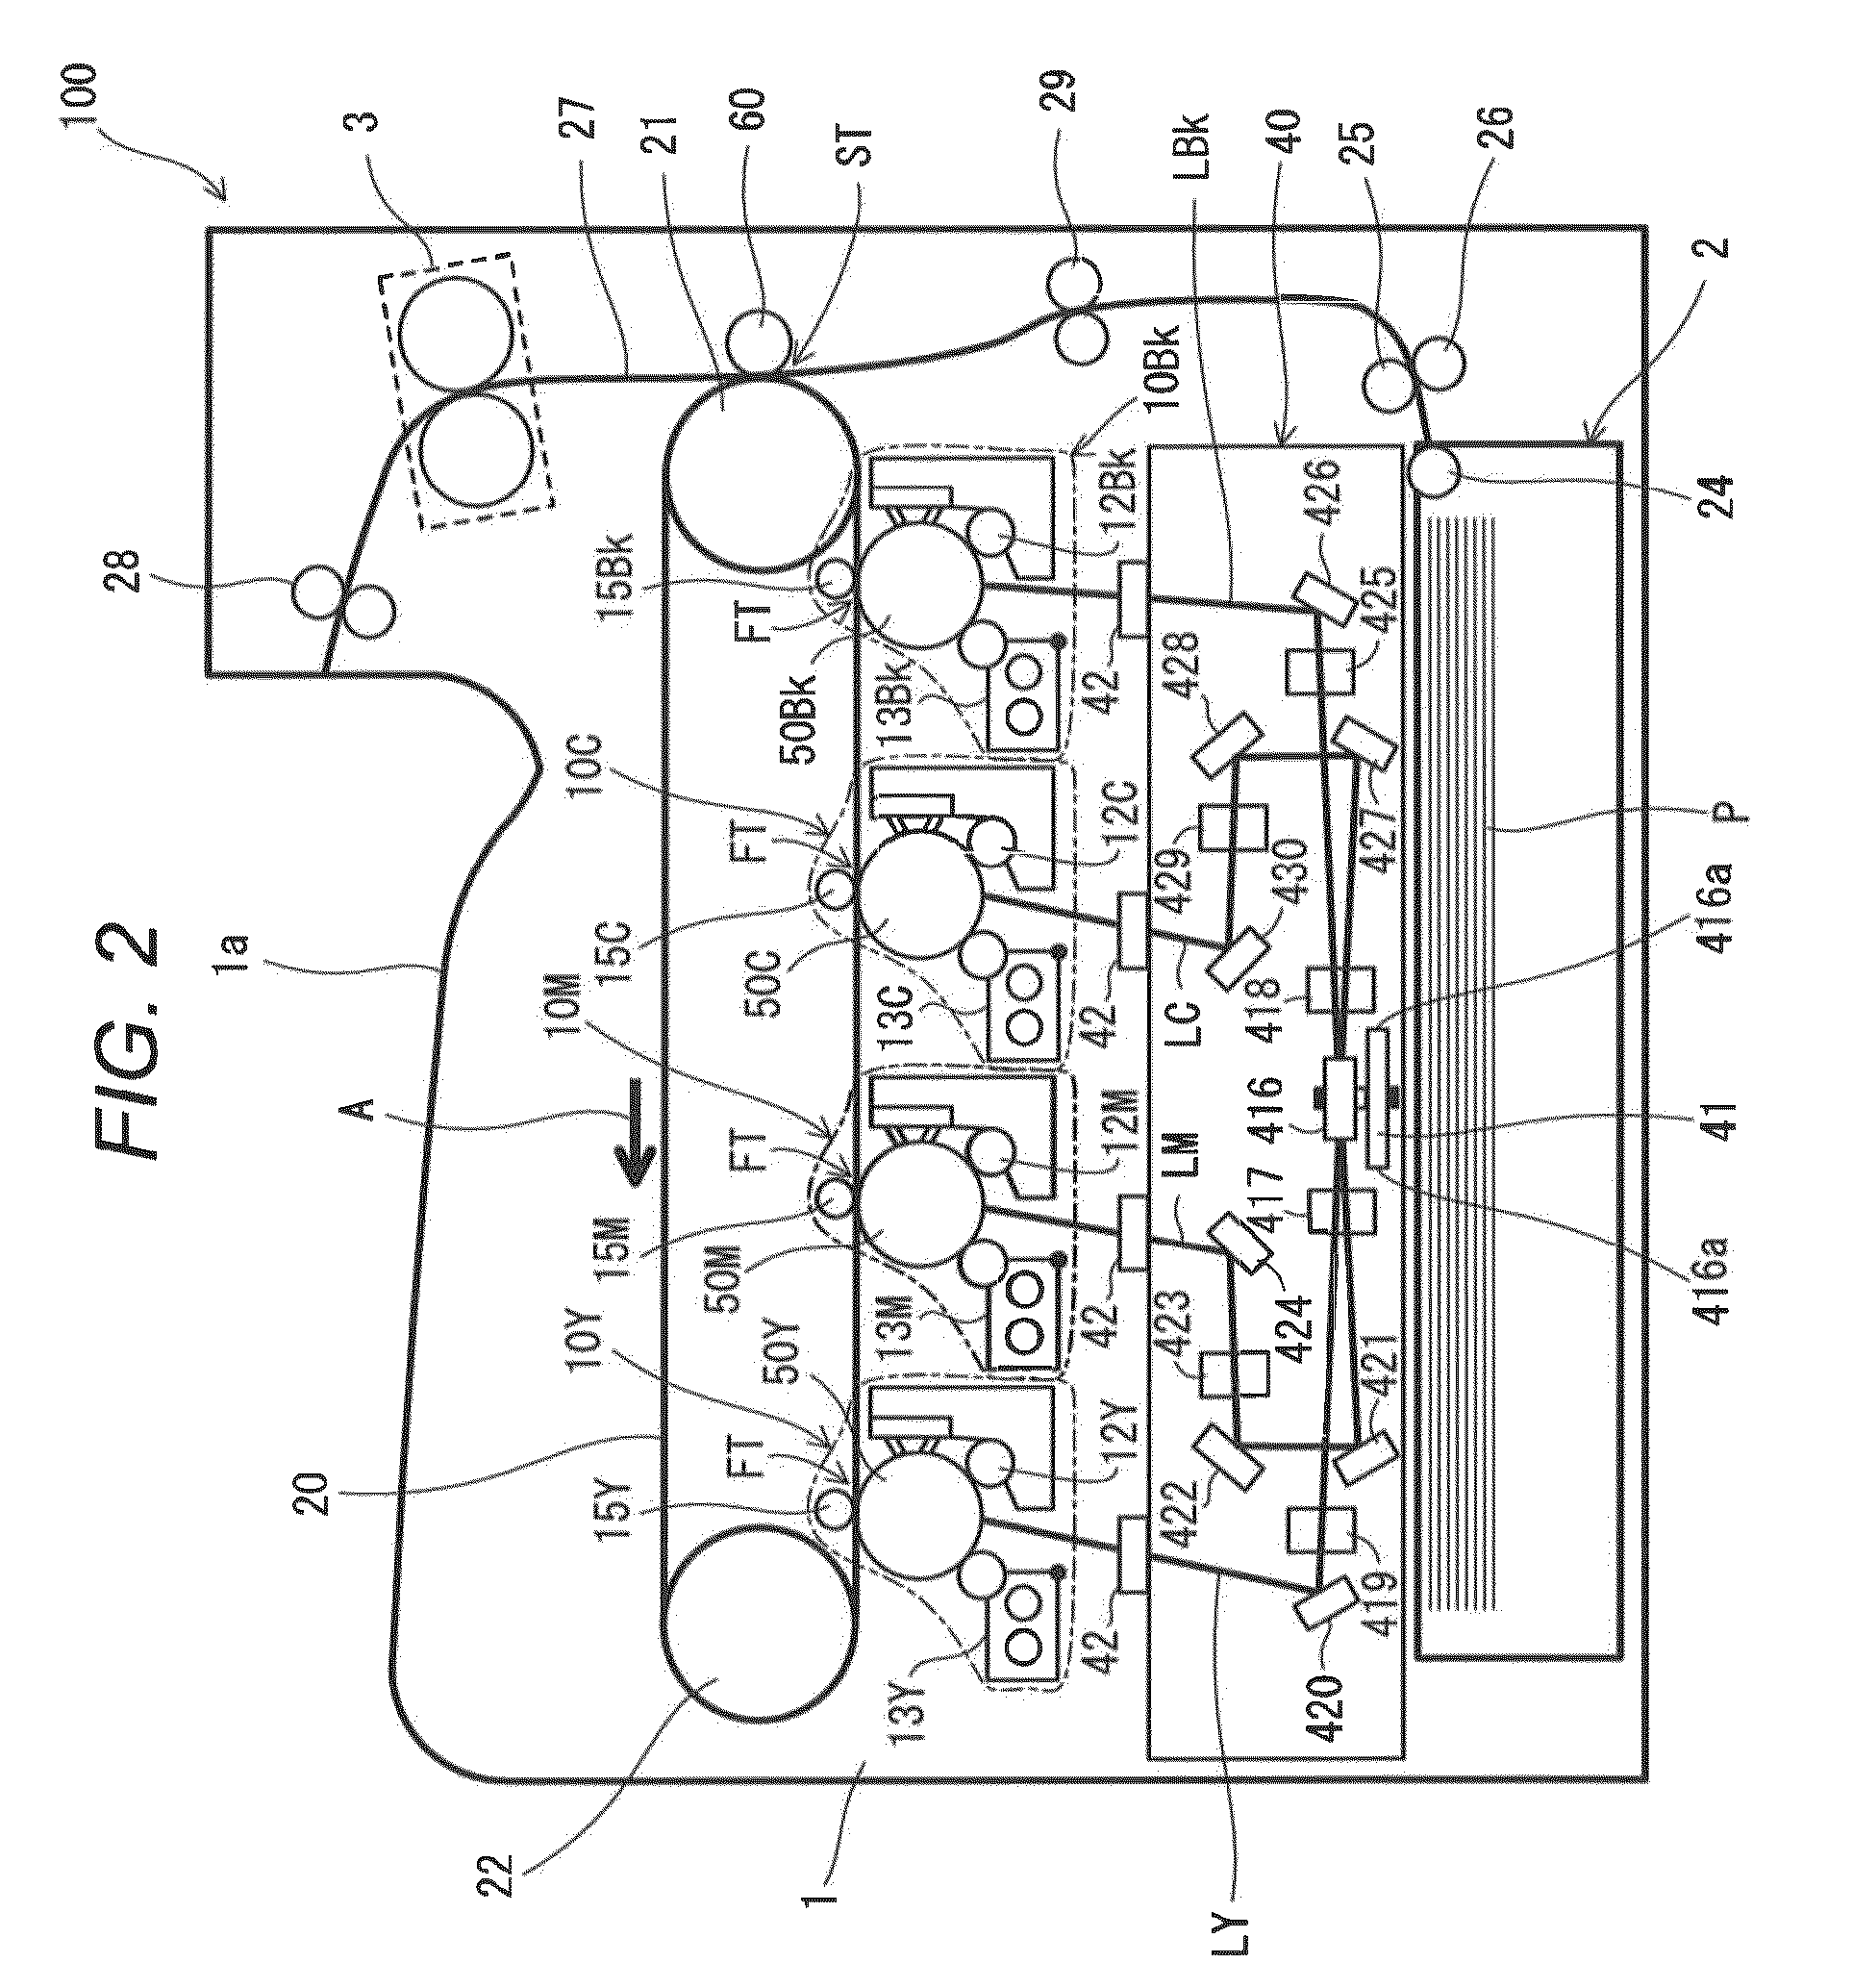 Light scanning apparatus and image forming apparatus